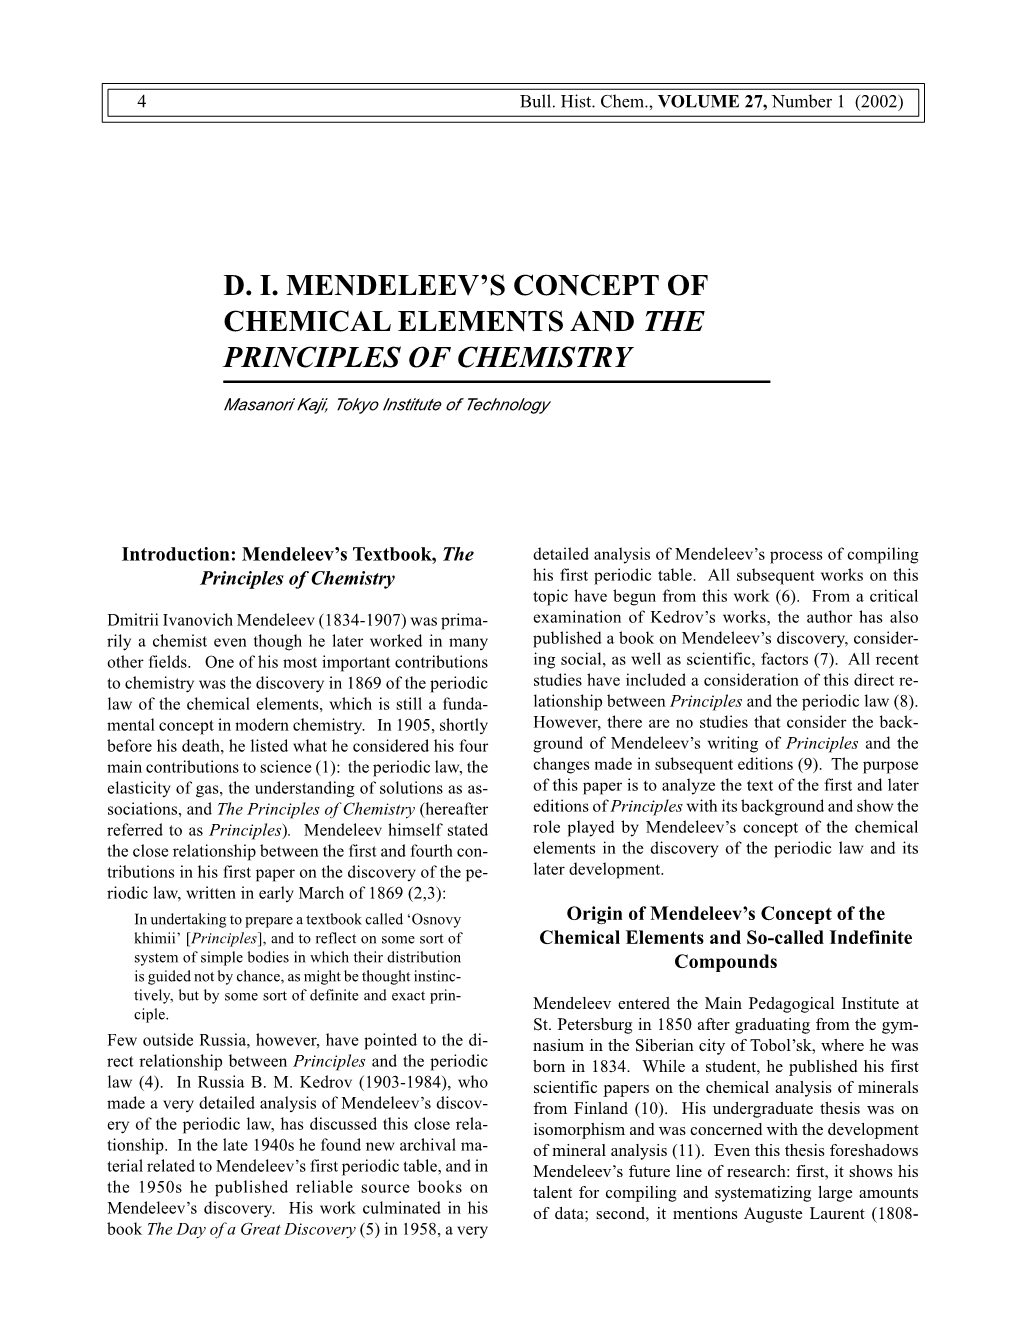 D. I. Mendeleev's Concept of Chemical Elements and the Principles Of